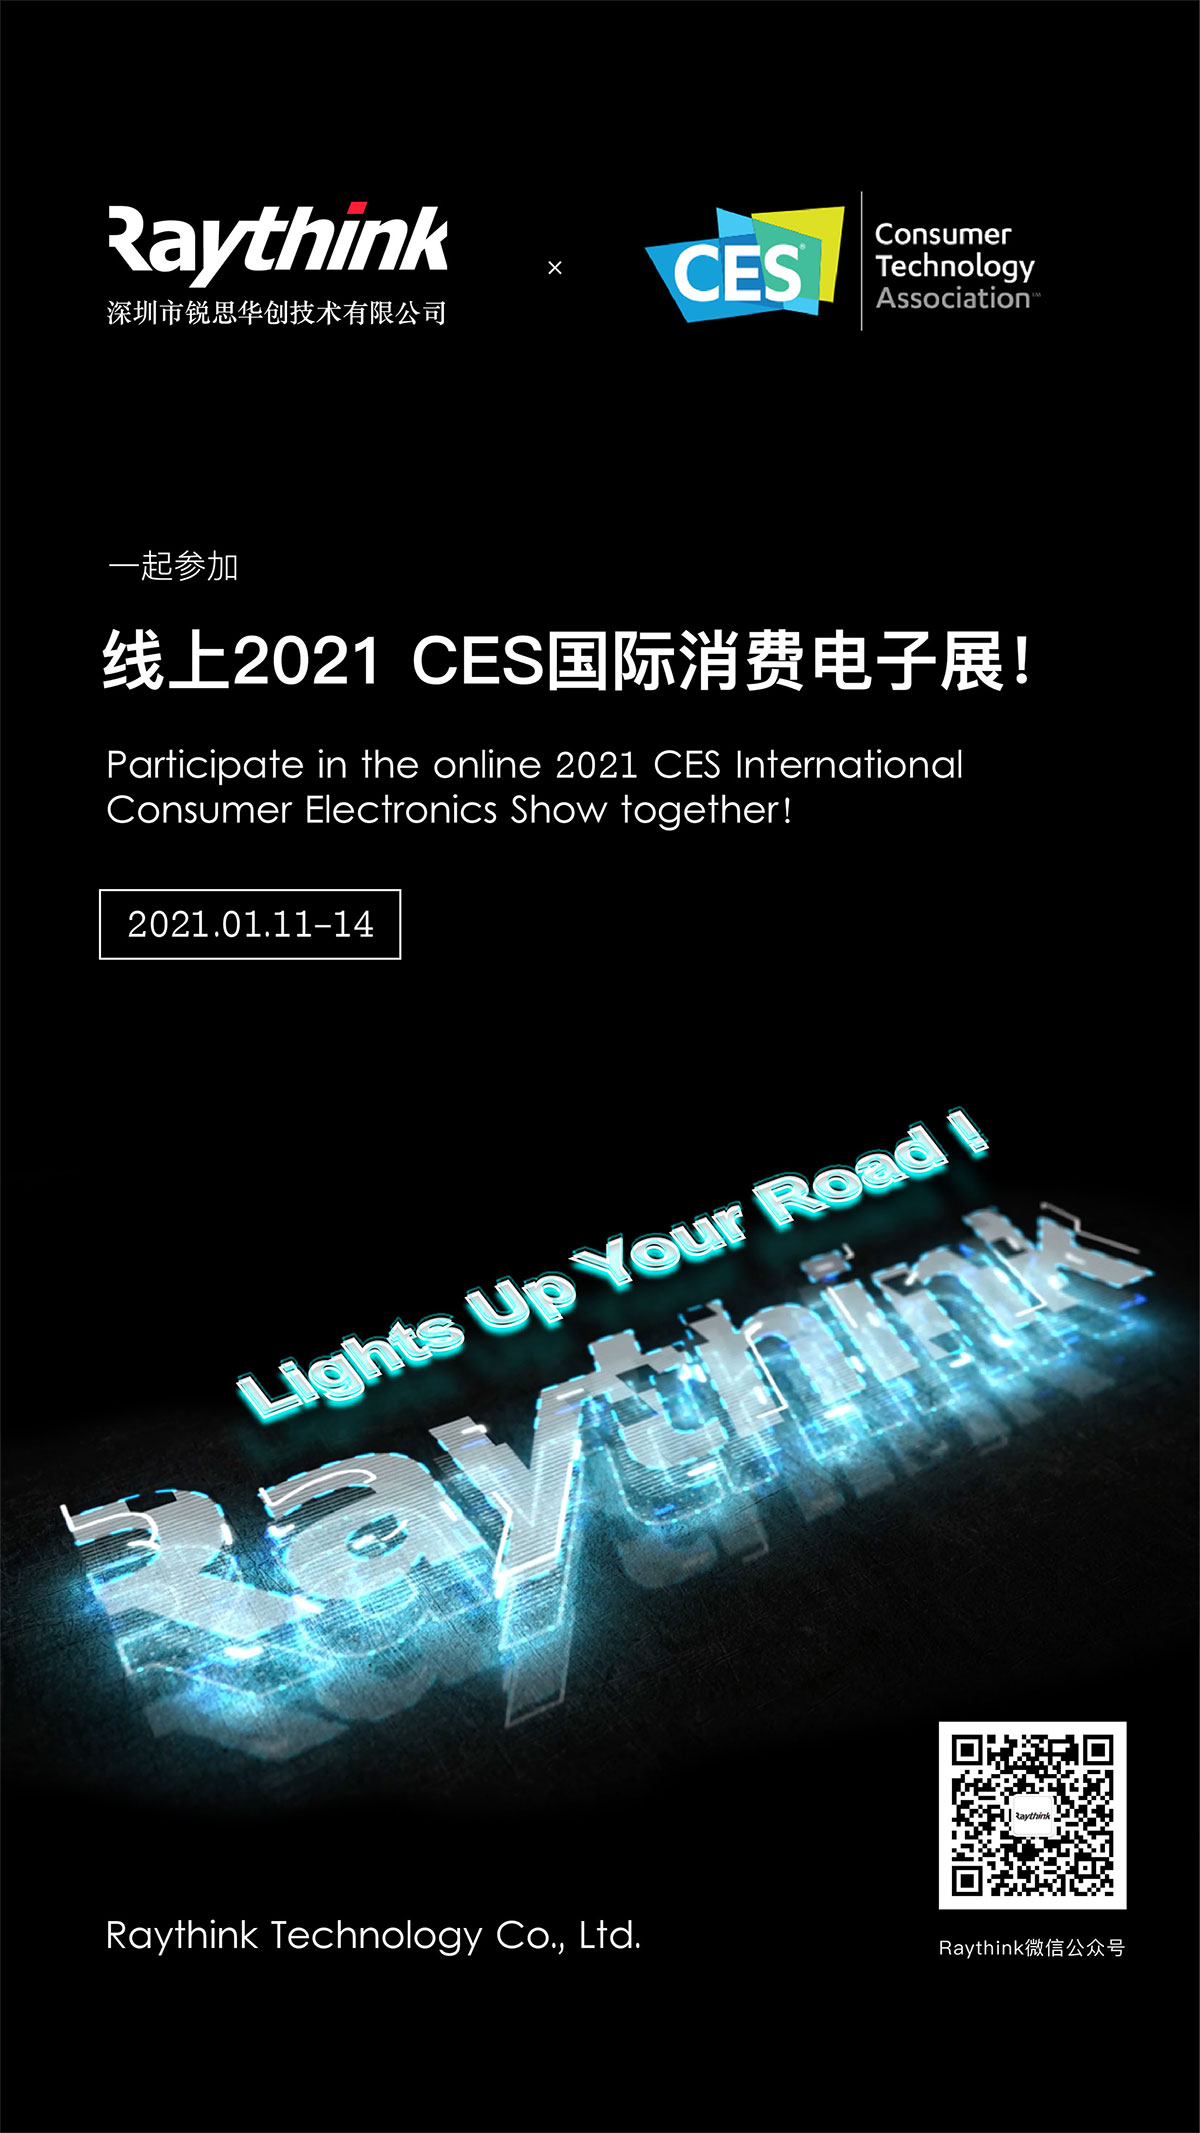 Raythink will be exhibiting on CES digital activation 2021